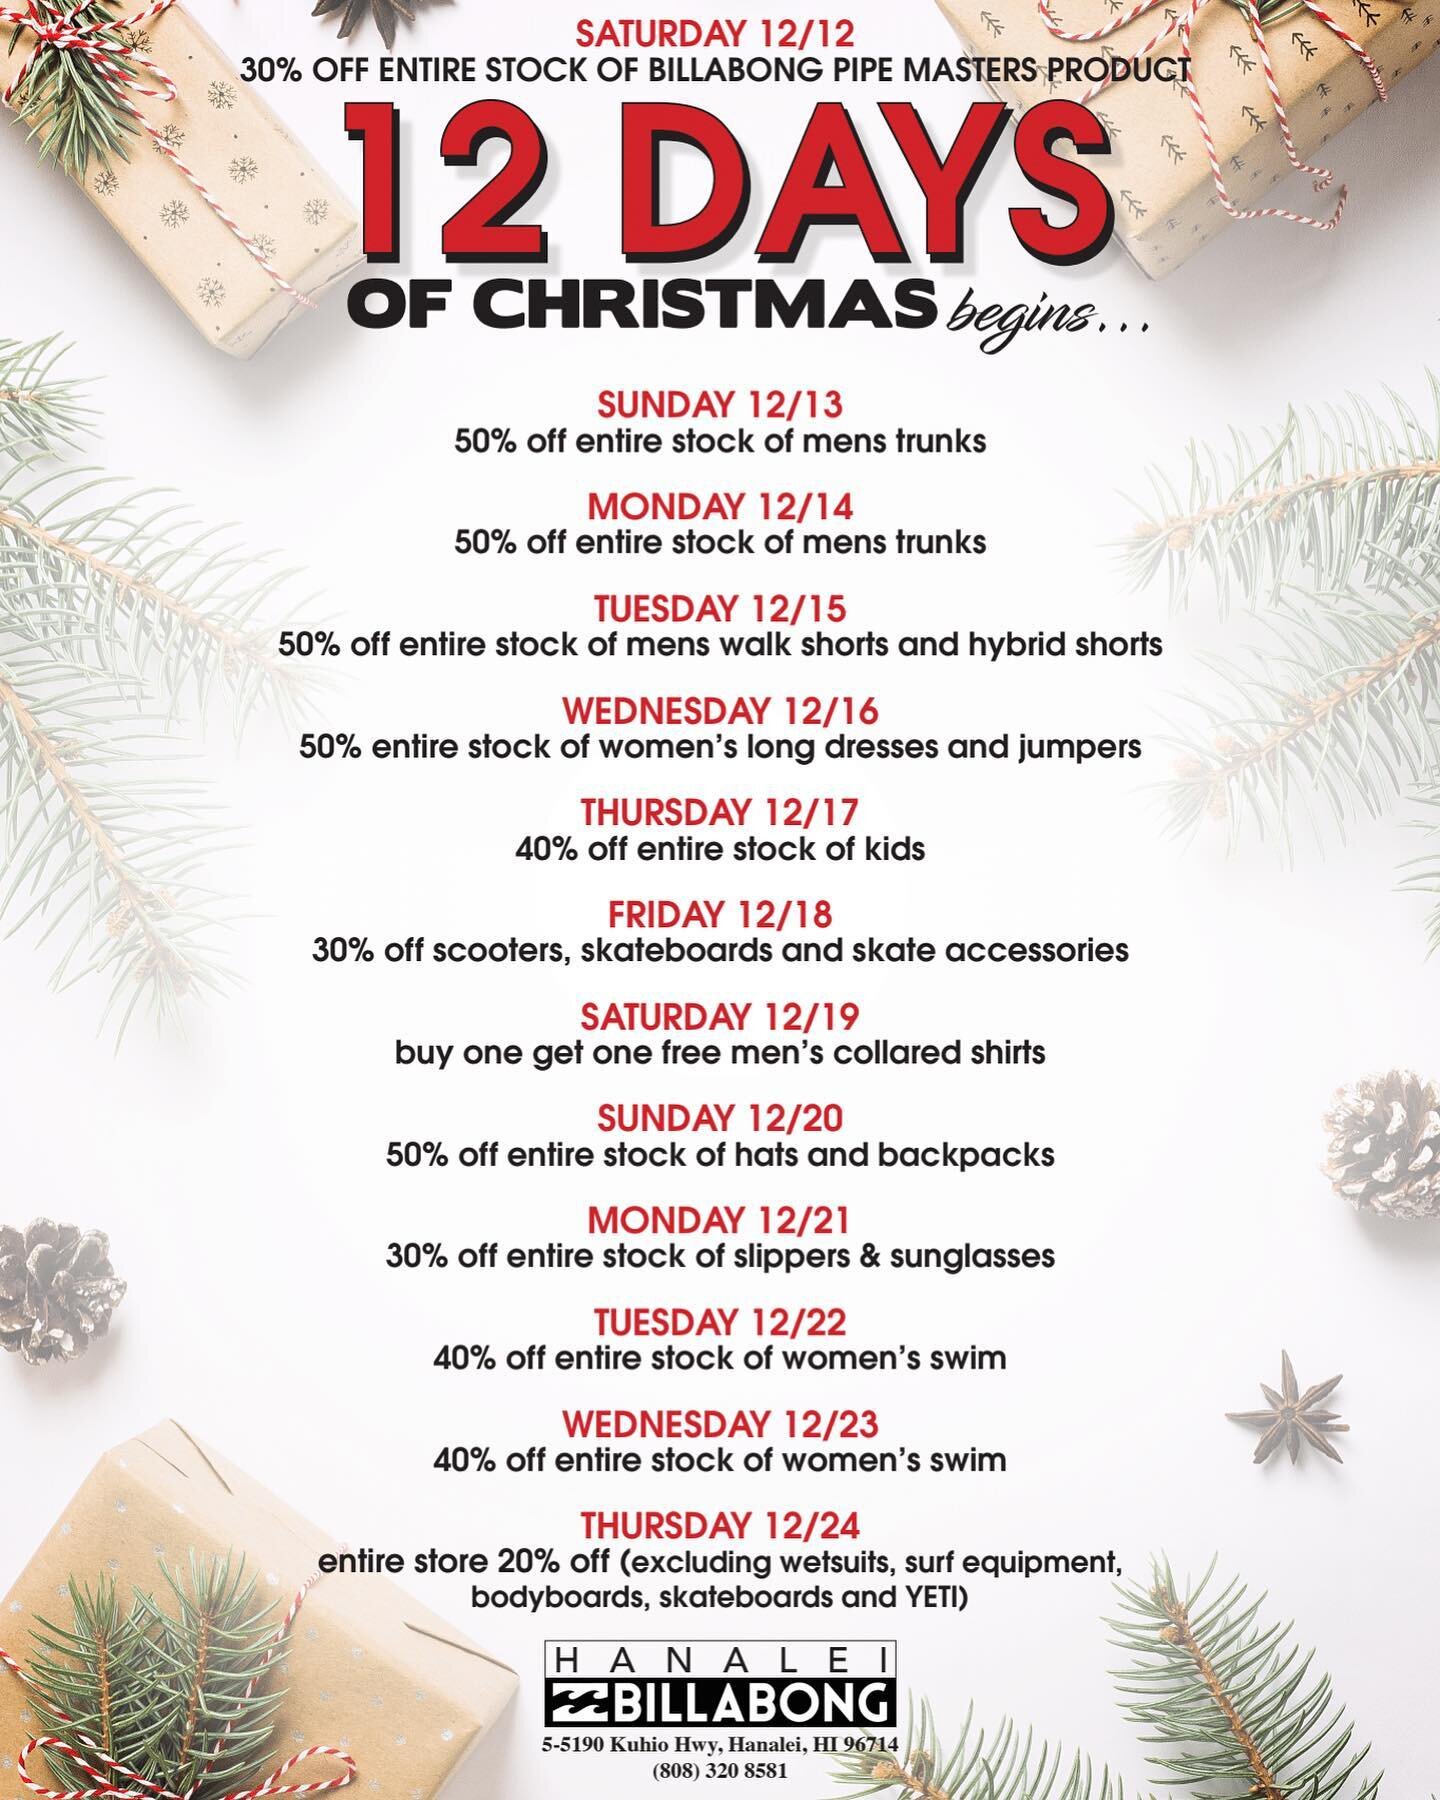 12 Days of Christmas Sale Starts tomorrow! See you there ❤️🎄 🎁